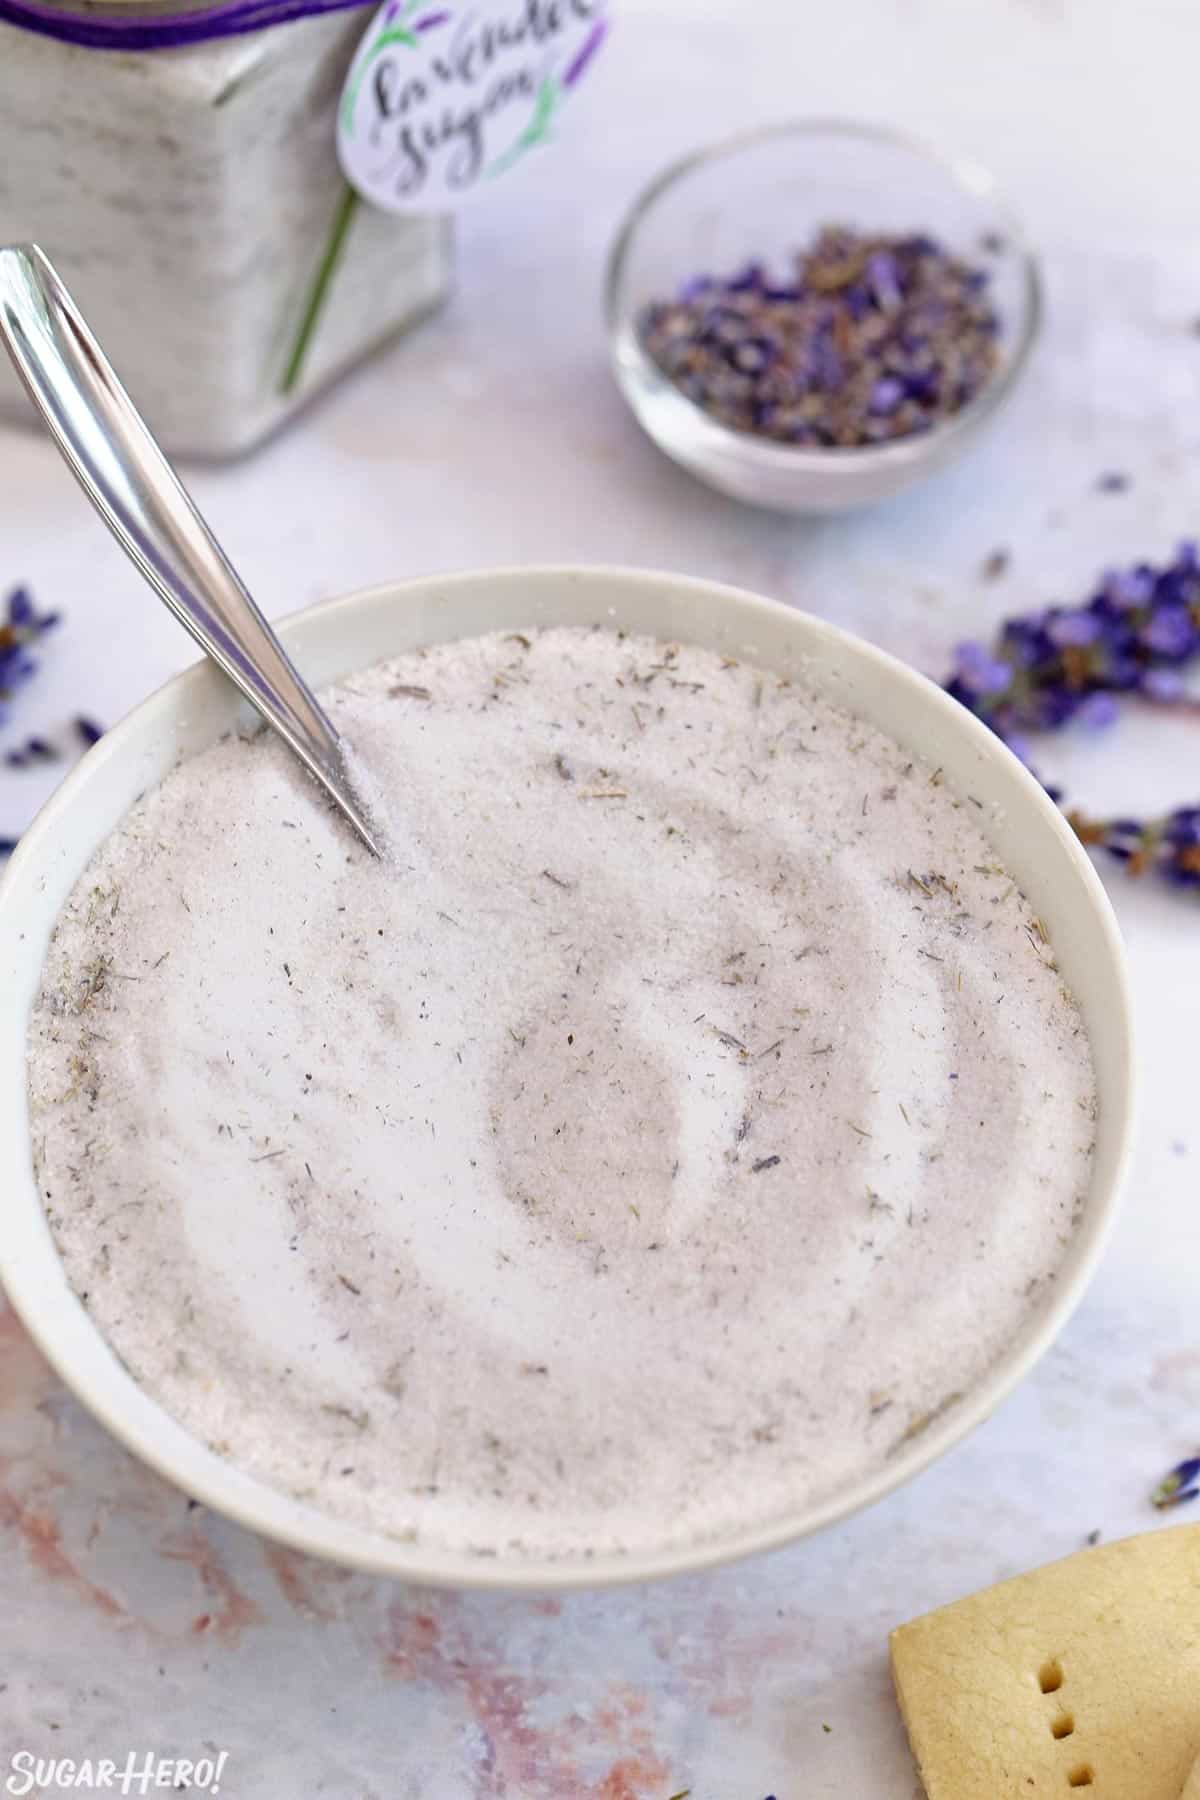 Lavender sugar in a white bowl on a marble surface, with lavender buds scattered around.